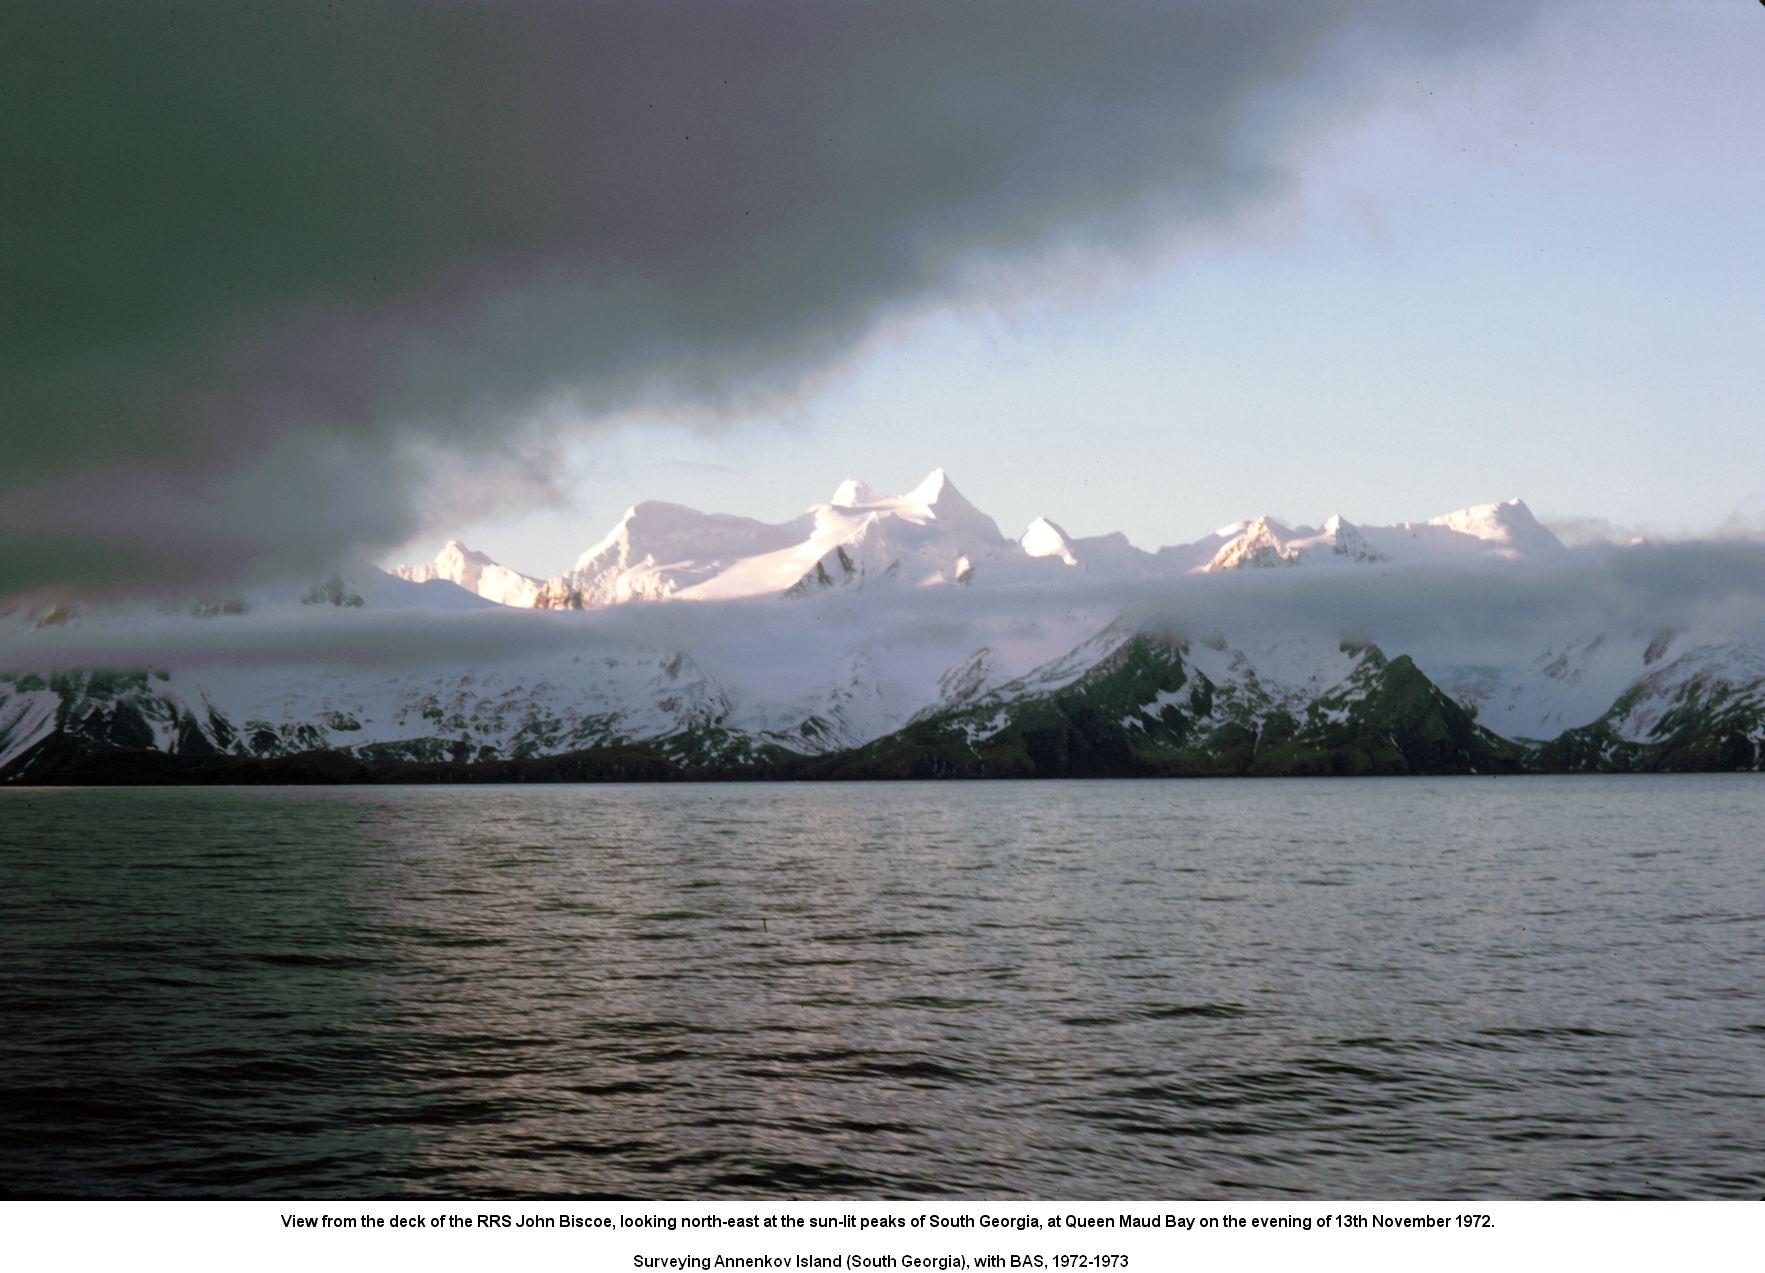 View from the deck of the RRS John Biscoe, looking north-east at the sun-lit peaks of South Georgia, at Queen Maud Bay on the evening of 13th November 1972.